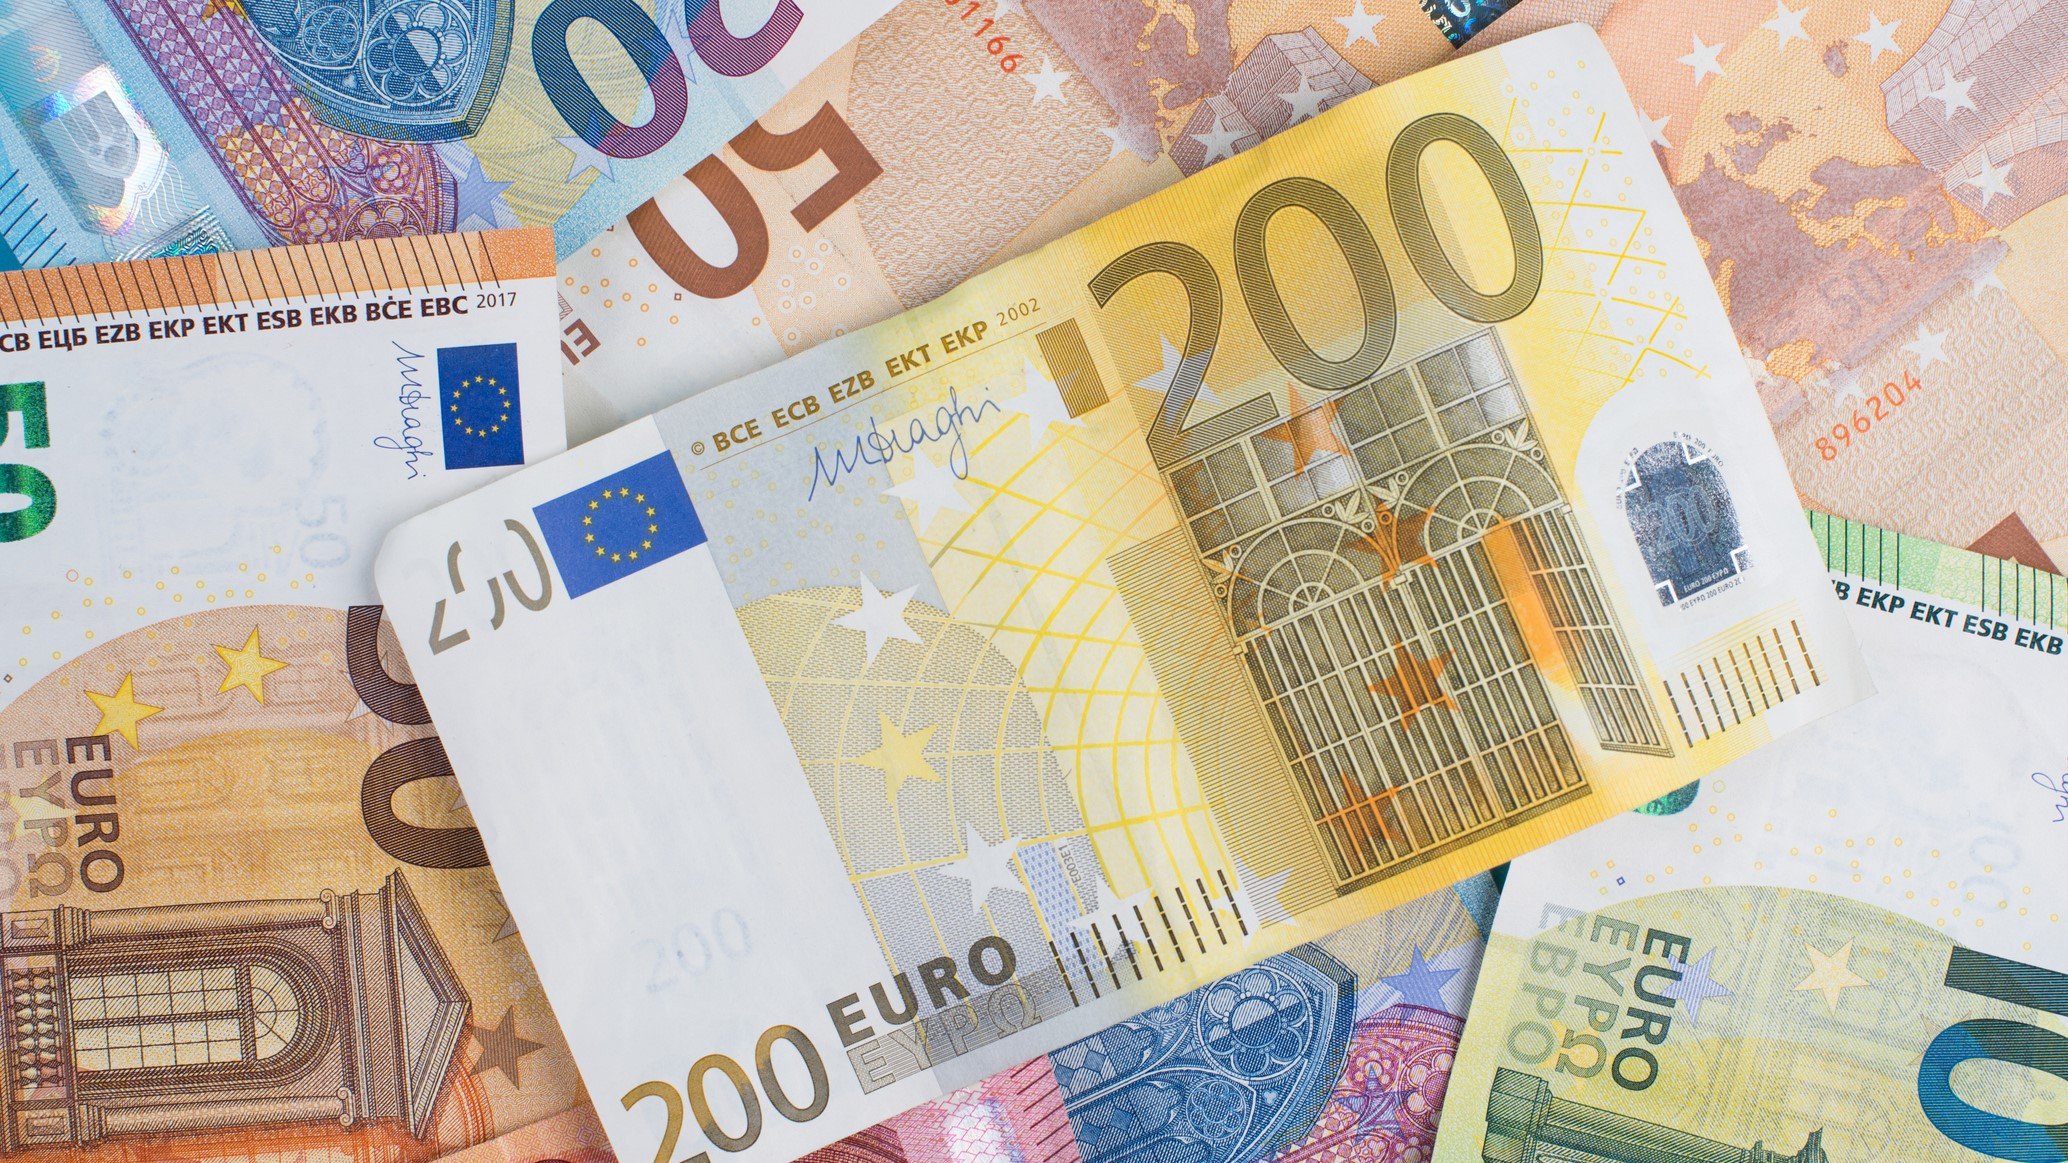 Forbion points to high investor demand in €1.3B raise for largest haul yet